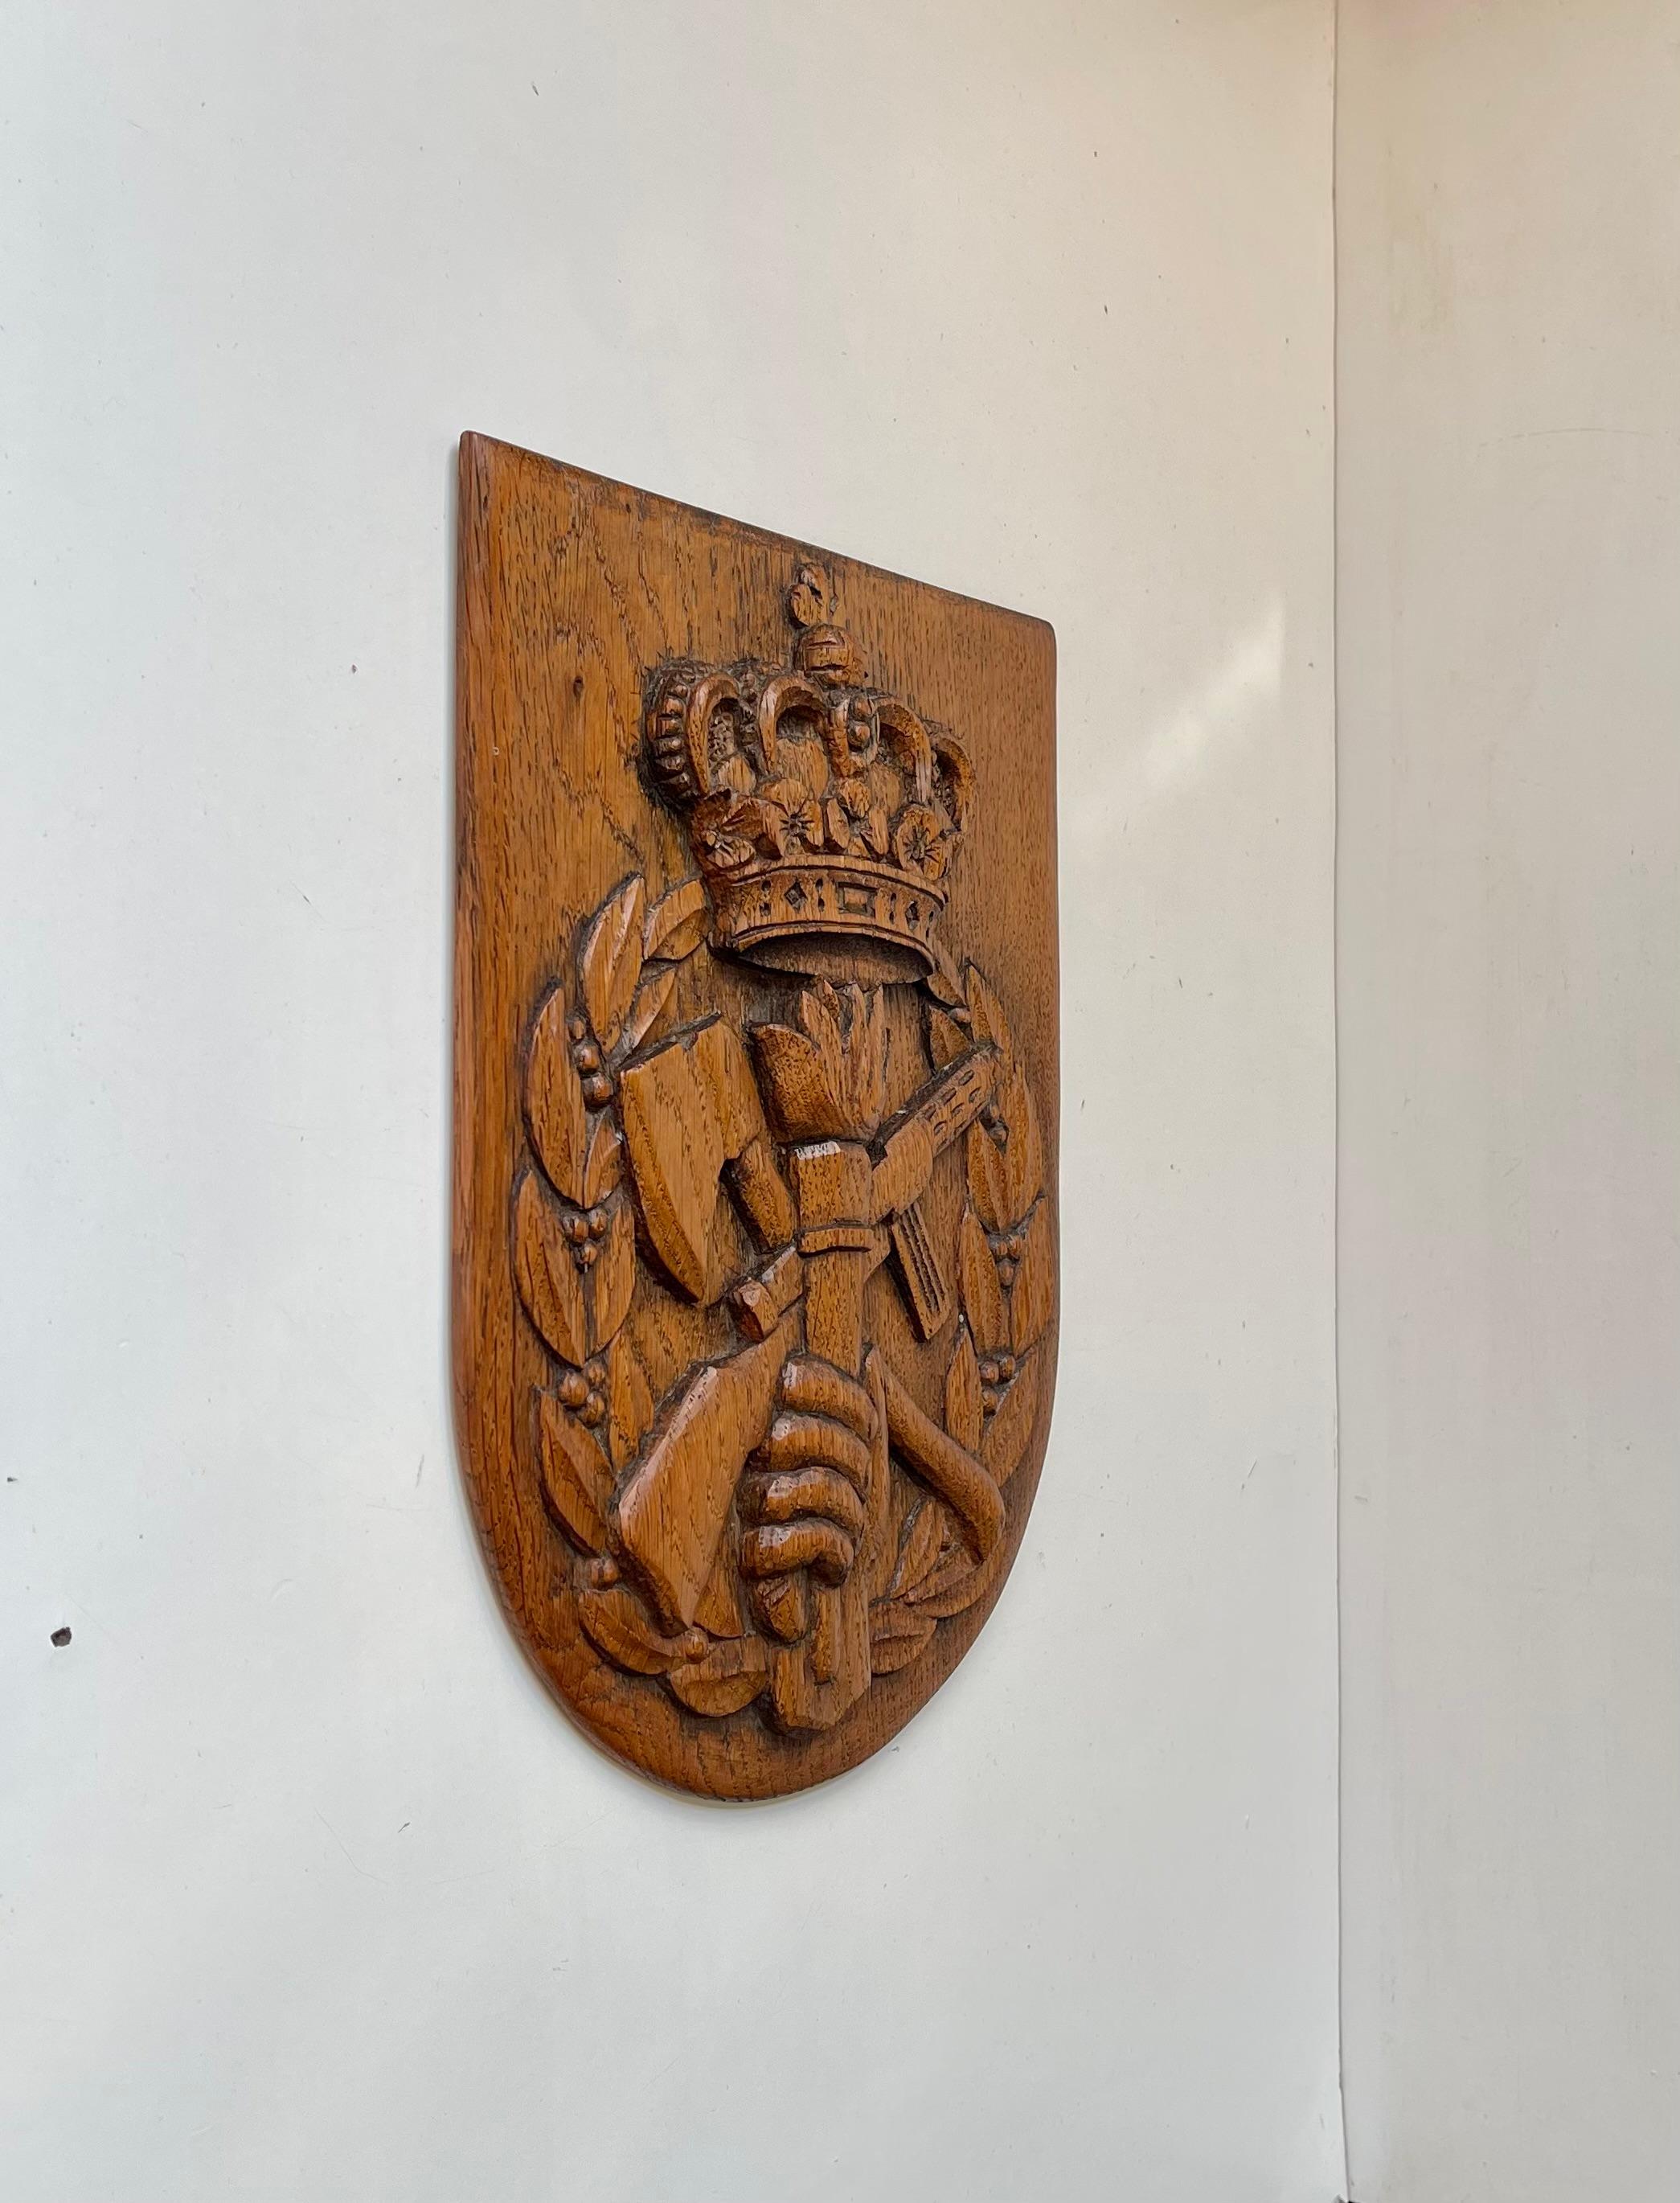 Unusual East Block/Balkan Coat of Arms in hand-carved oak. An excess of masculine elements: crown, machine-gun, torch, axe, fist. Heraldic symbolism here and there. Very wellkept - can be displayed on the wall. Measurements: H: 29.5 cm, W: 23, Dept: